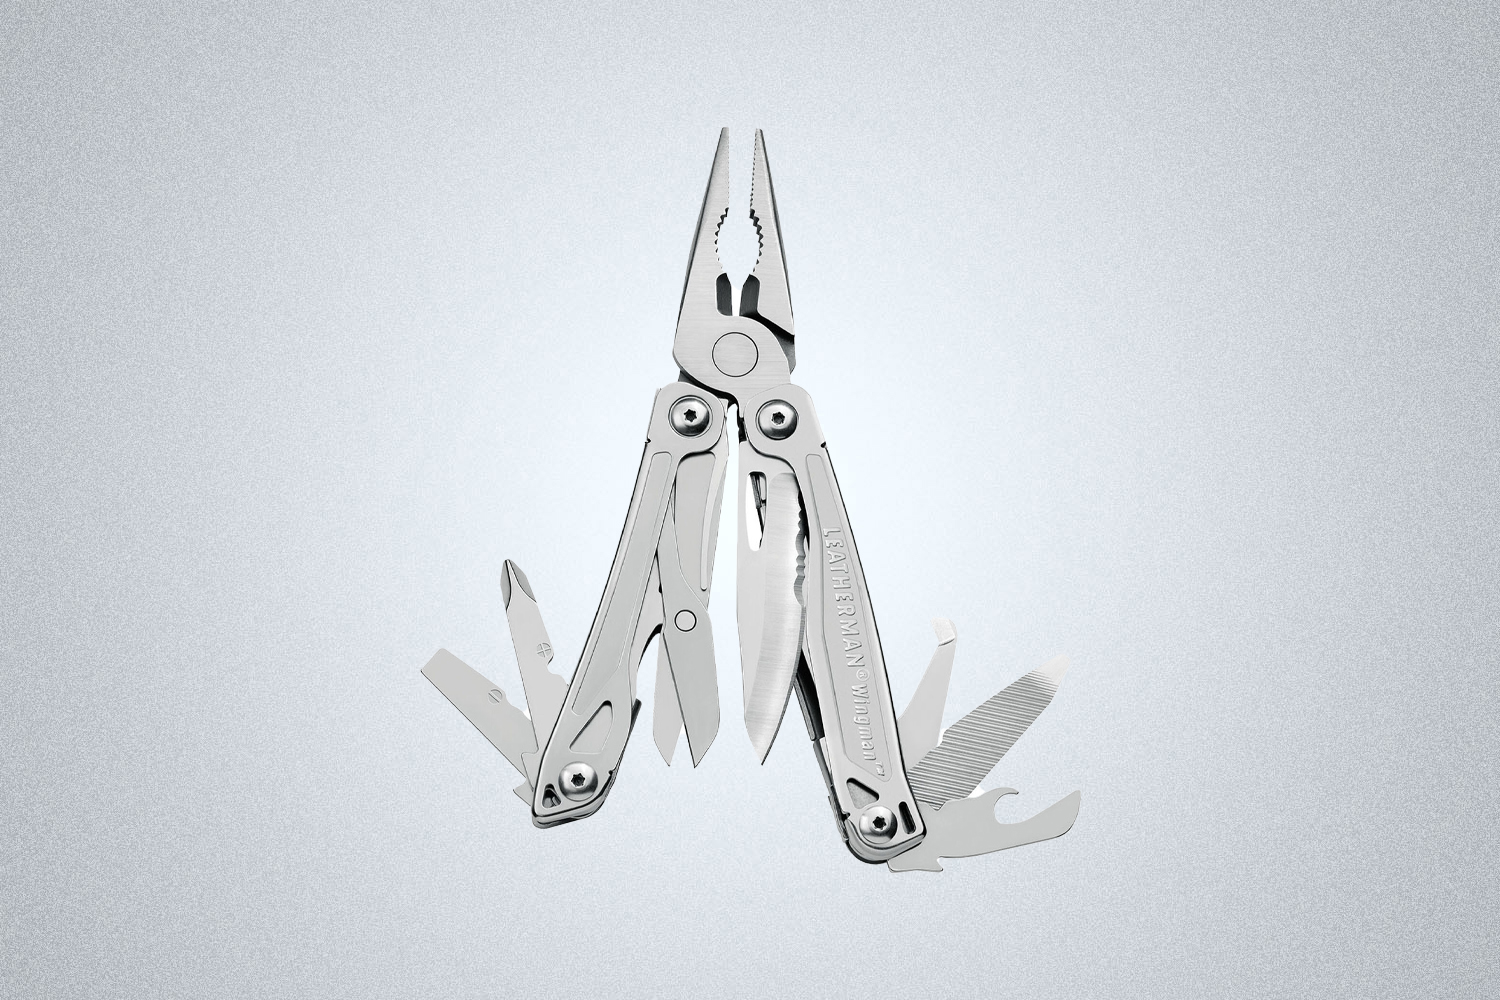 The Leatherman Wingman is one of the best multit-tools you can give for Father's Day that's less than $100